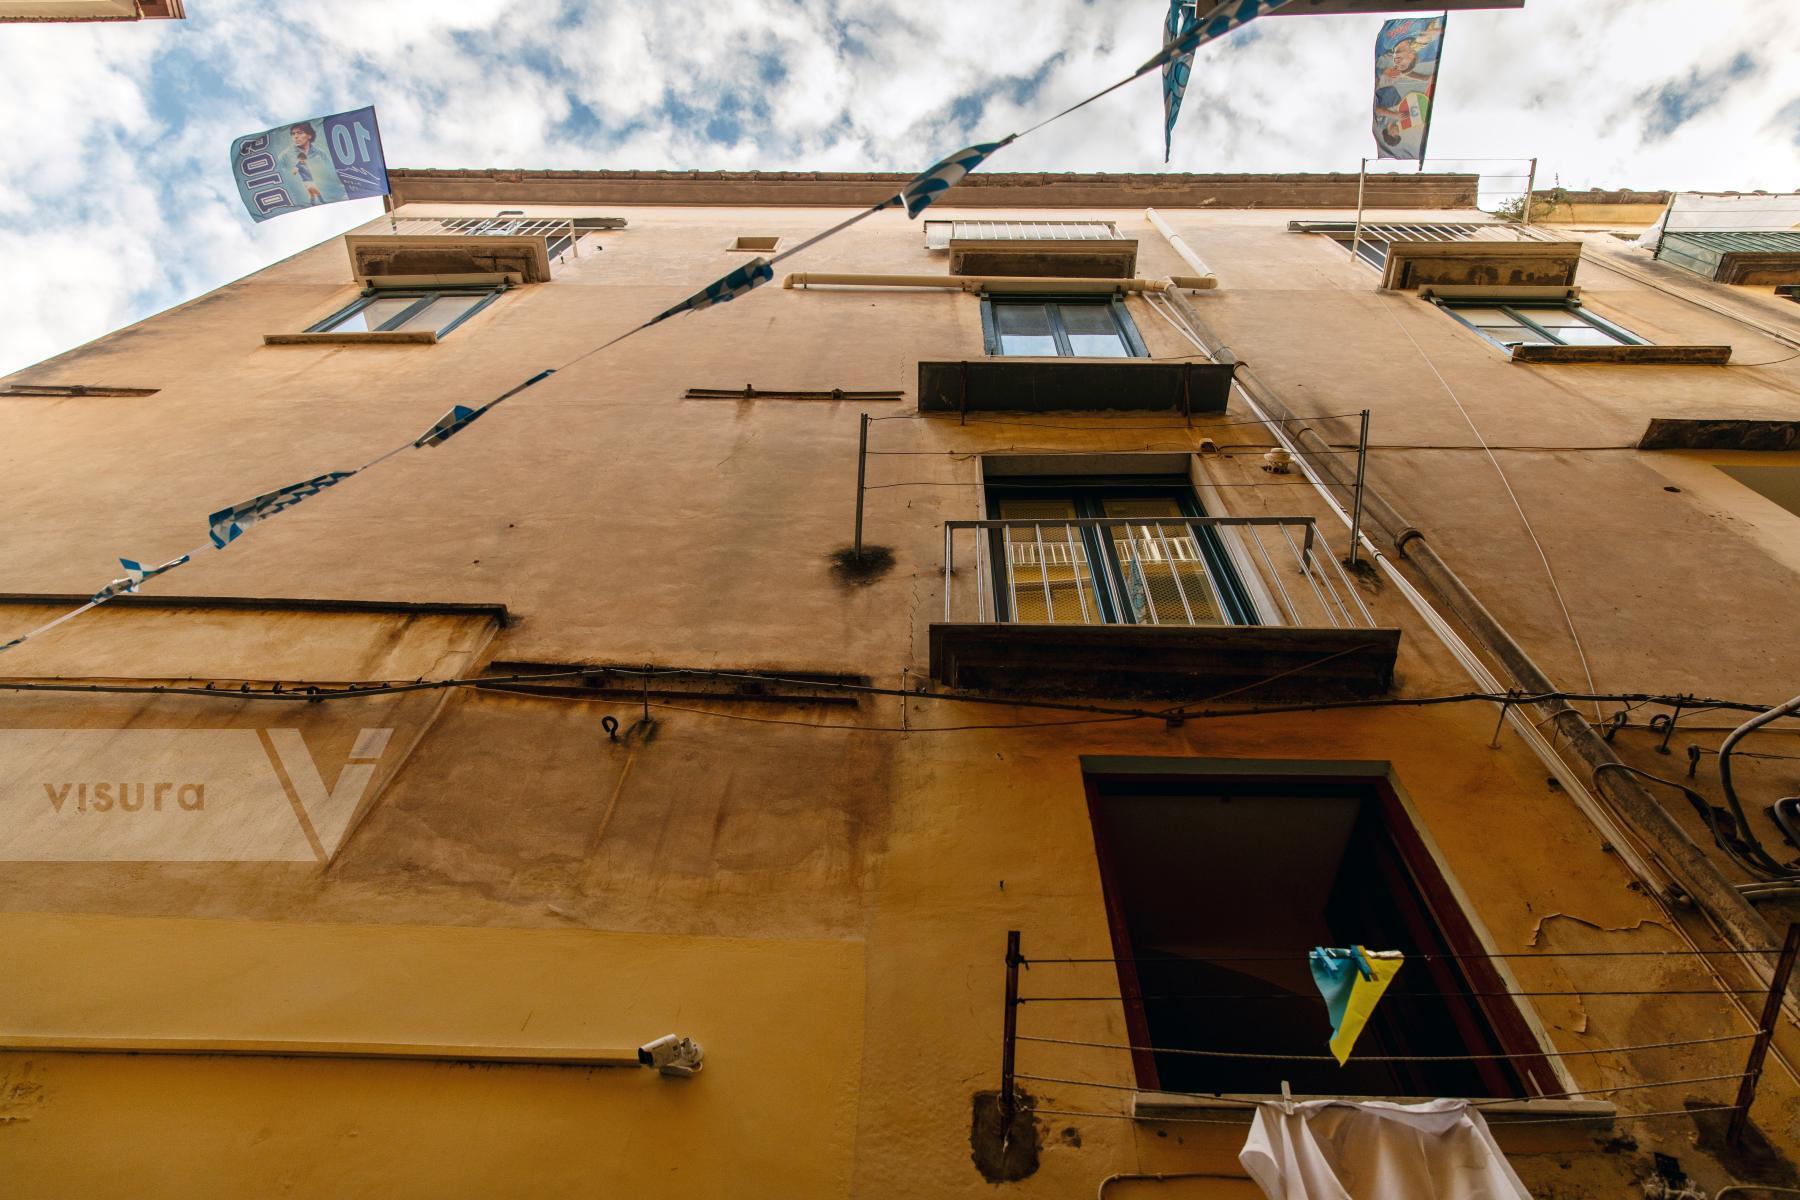 Purchase Football Club Flags in Sorrento, Italy by Katie Linsky Shaw